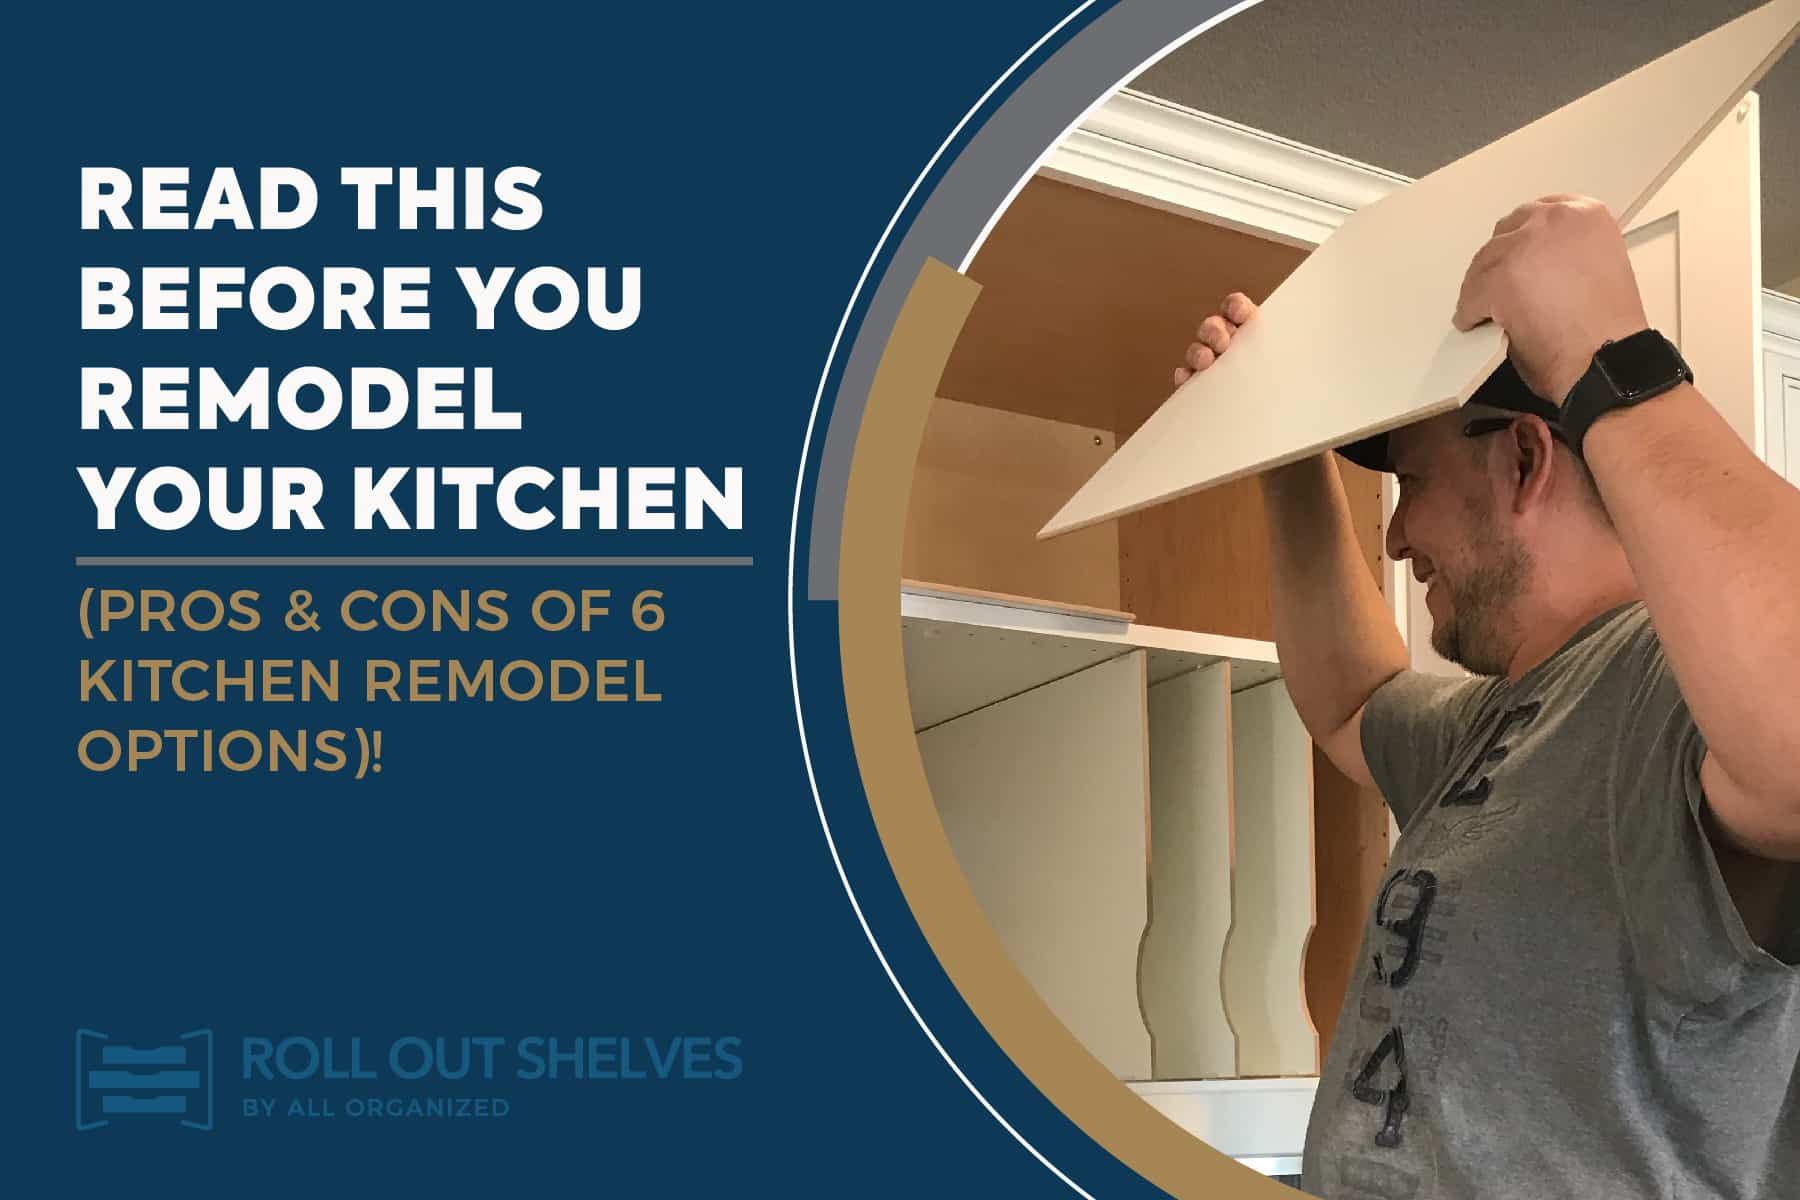 Read This Before You Remodel Your Kitchen (pros & cons of 6 kitchen remodel options)! 17